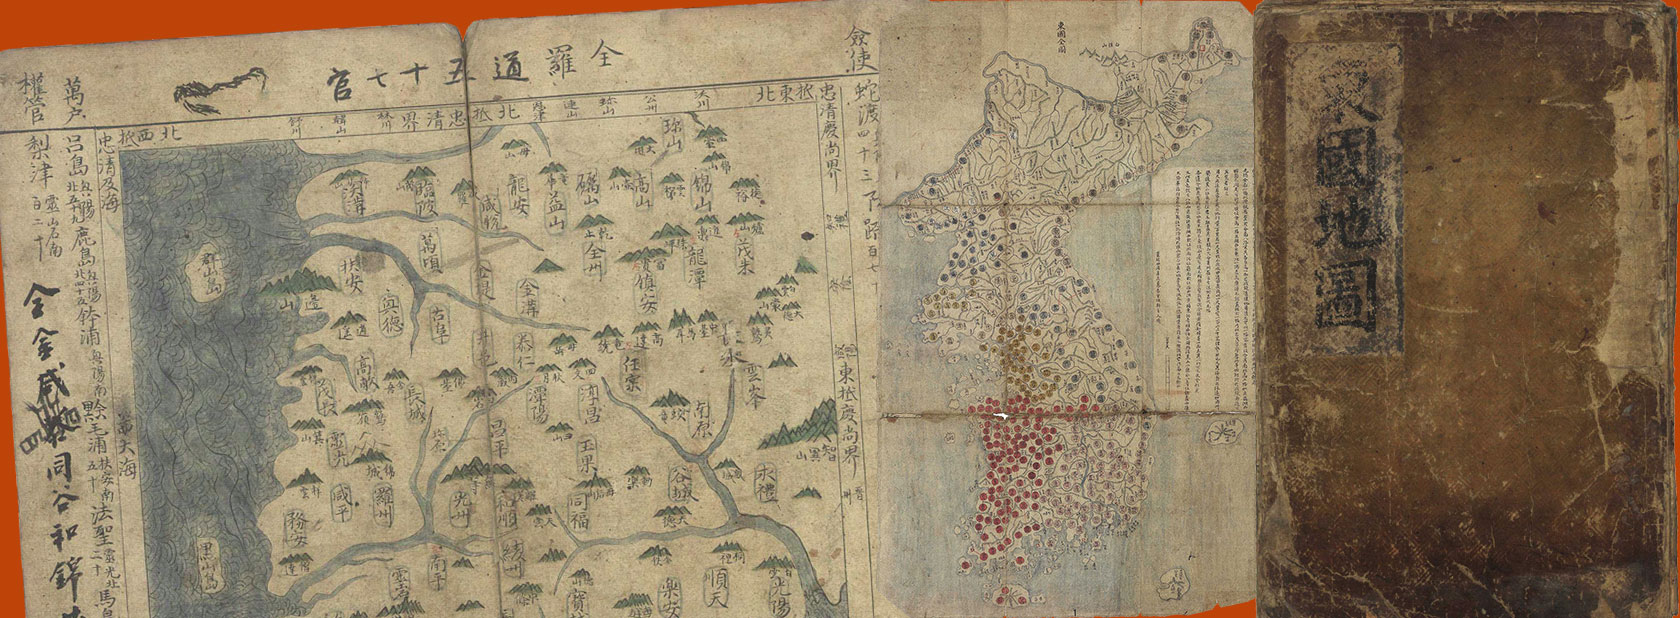 The Map of the Korea - Gunam produced the map of the Korea in 1811 enunciating the eight provinces of Korea.